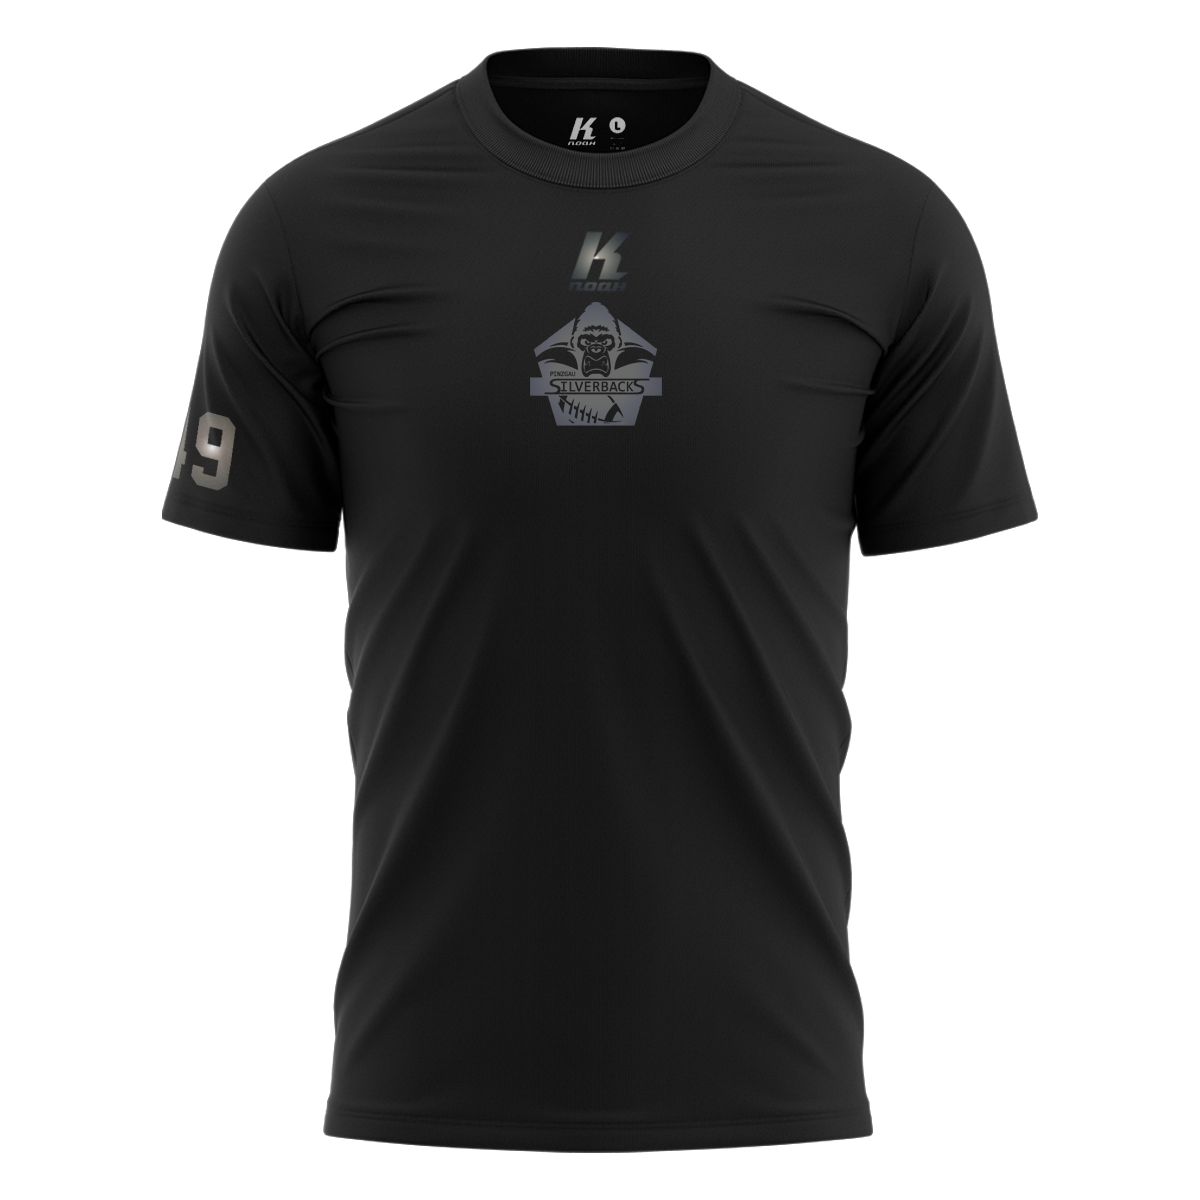 Silverbacks "Blackline" K.Tech Sports Tee S8000 with Playernumber/Initials